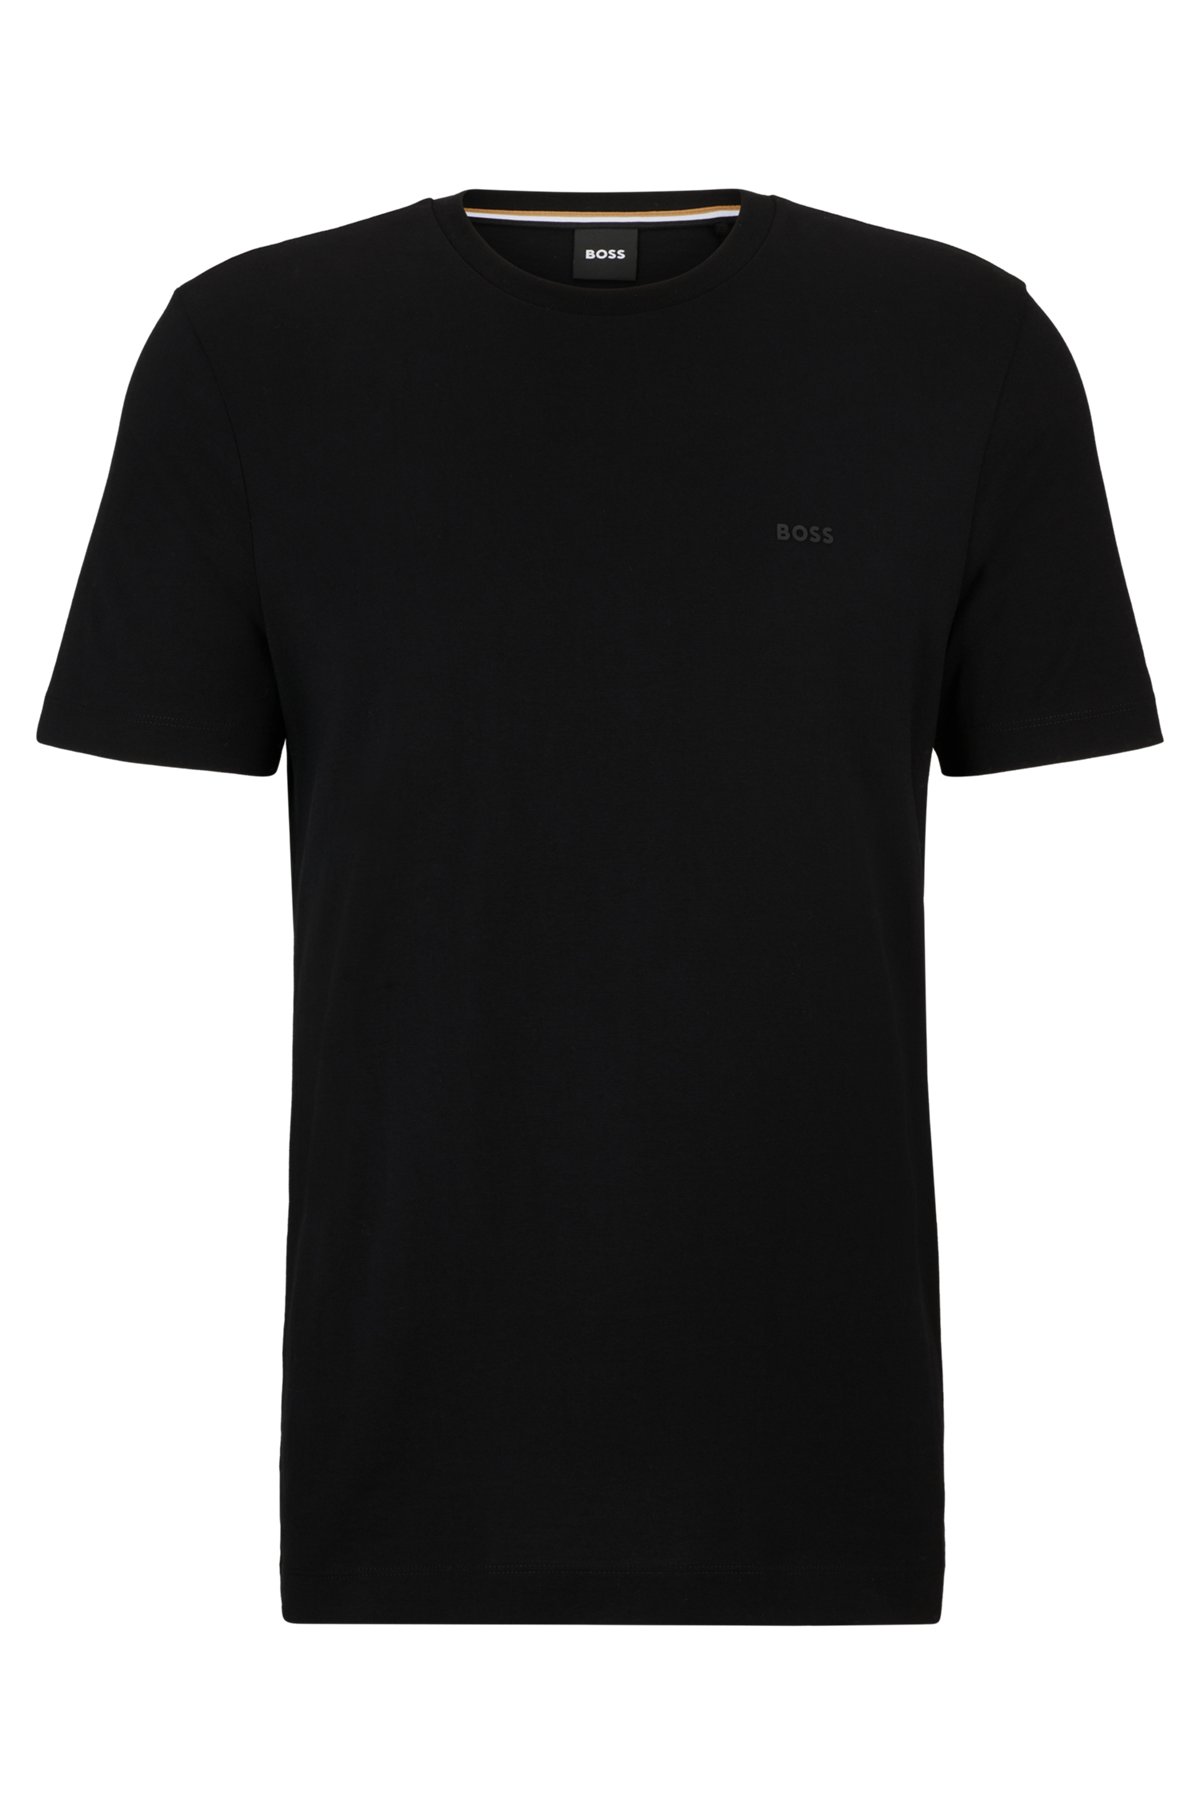 Cotton-jersey T-shirt with rubber-print logo, Black